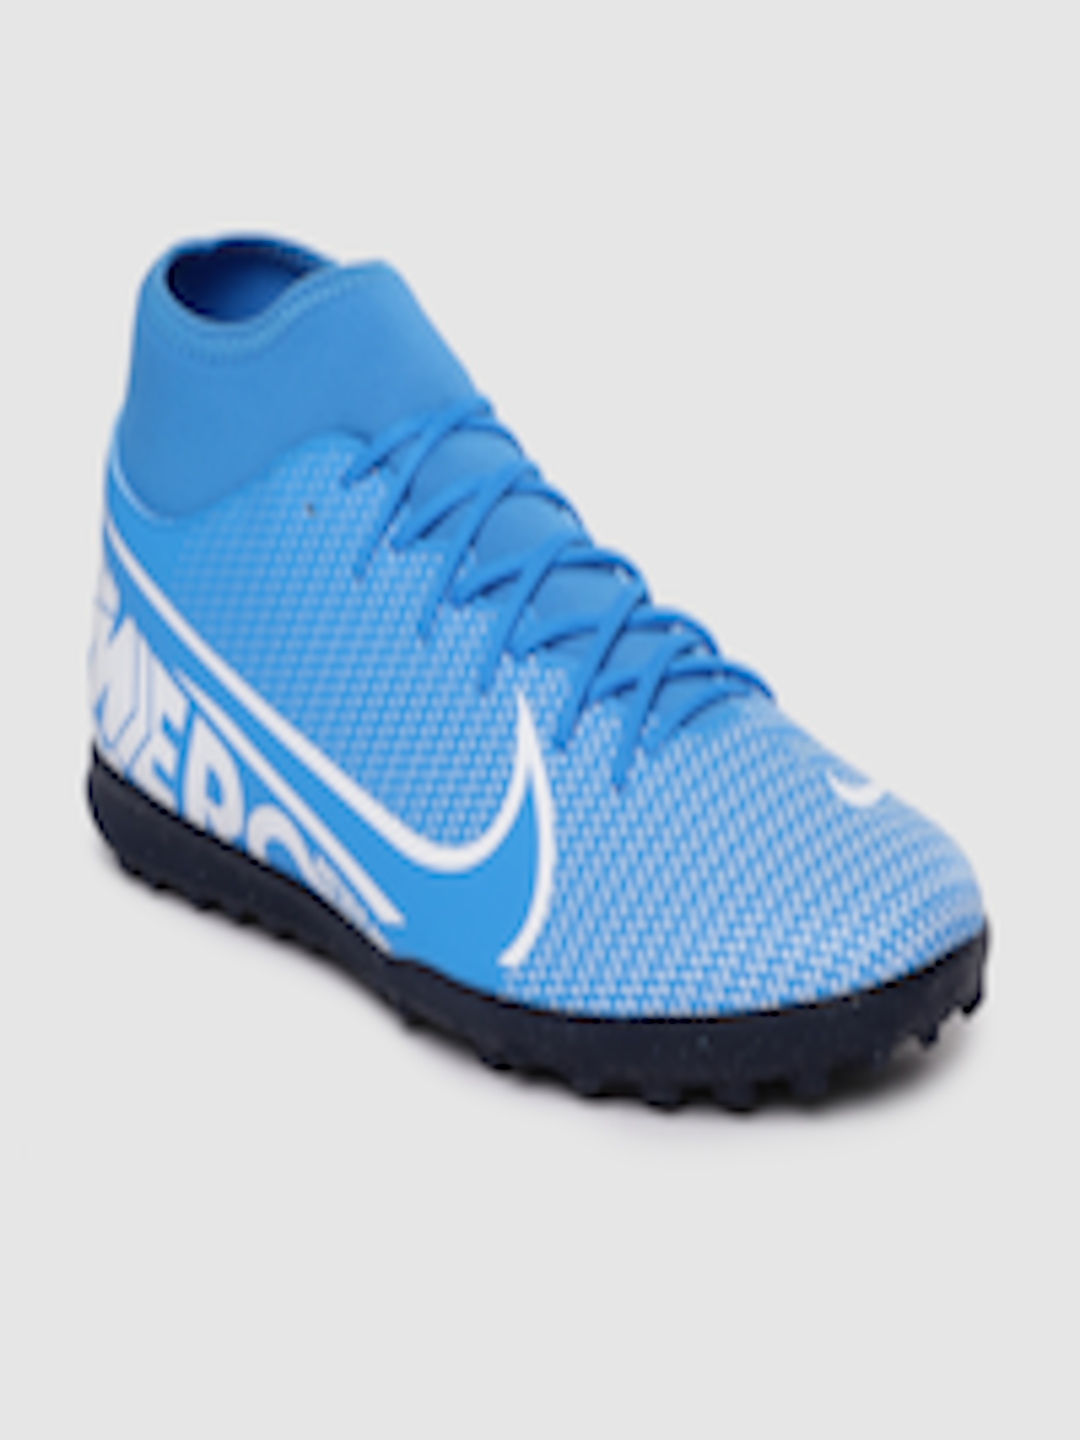 Buy Nike  Unisex Blue Synthetic Football  Shoes  Sports 